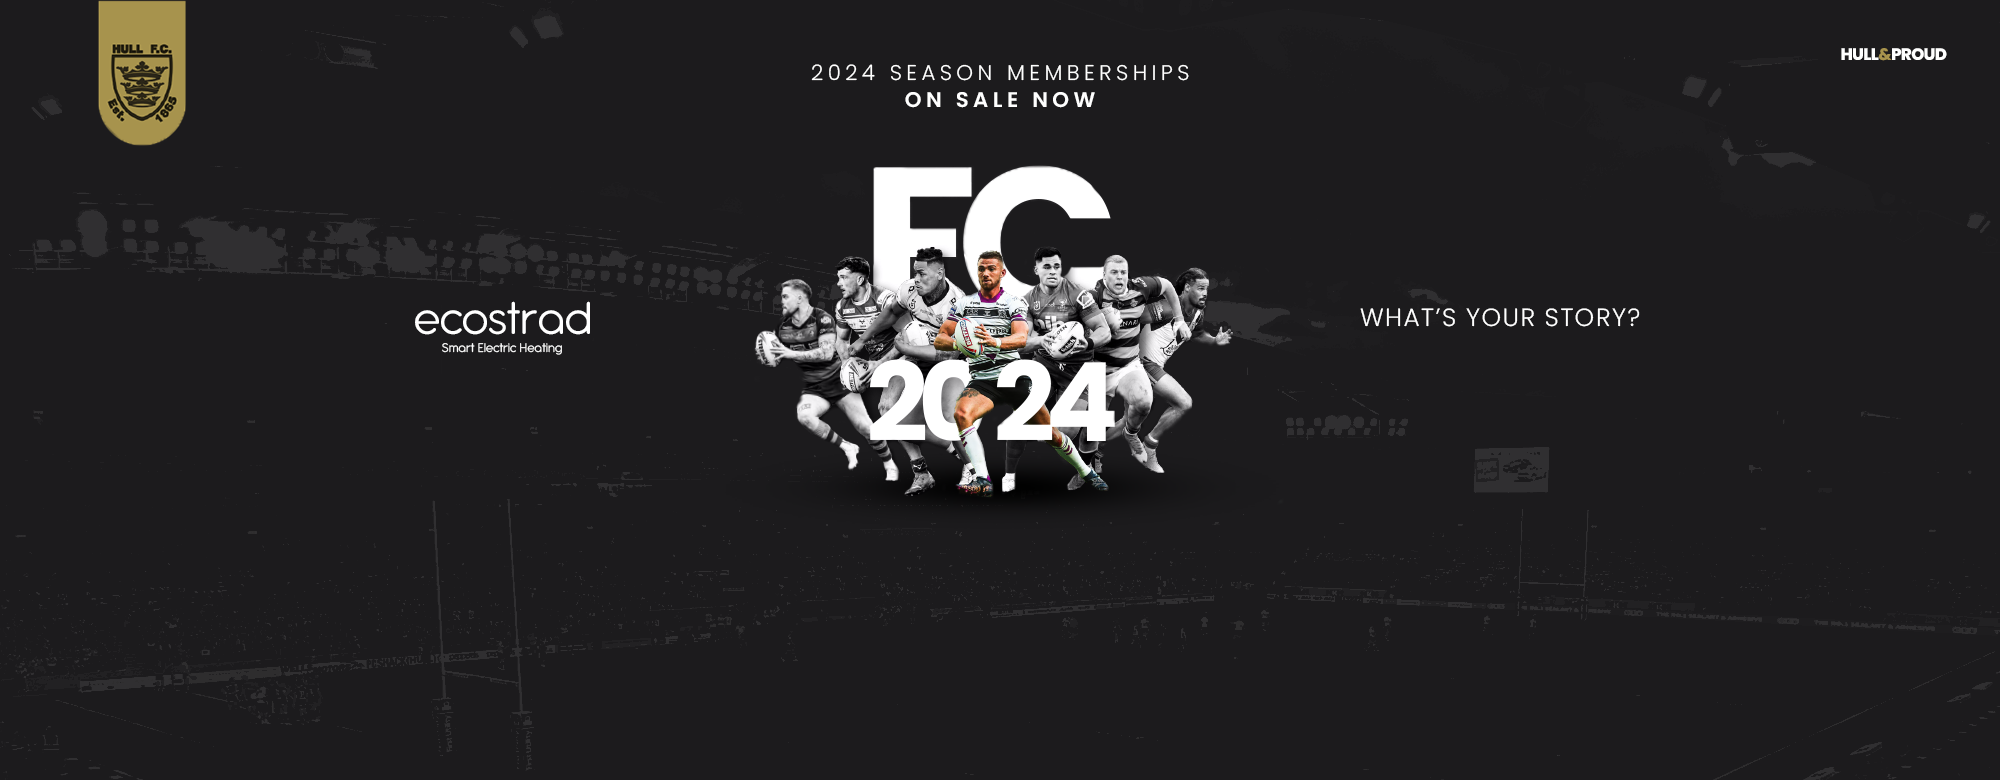 2024 Memberships On Sale Now – What’s Your Story?